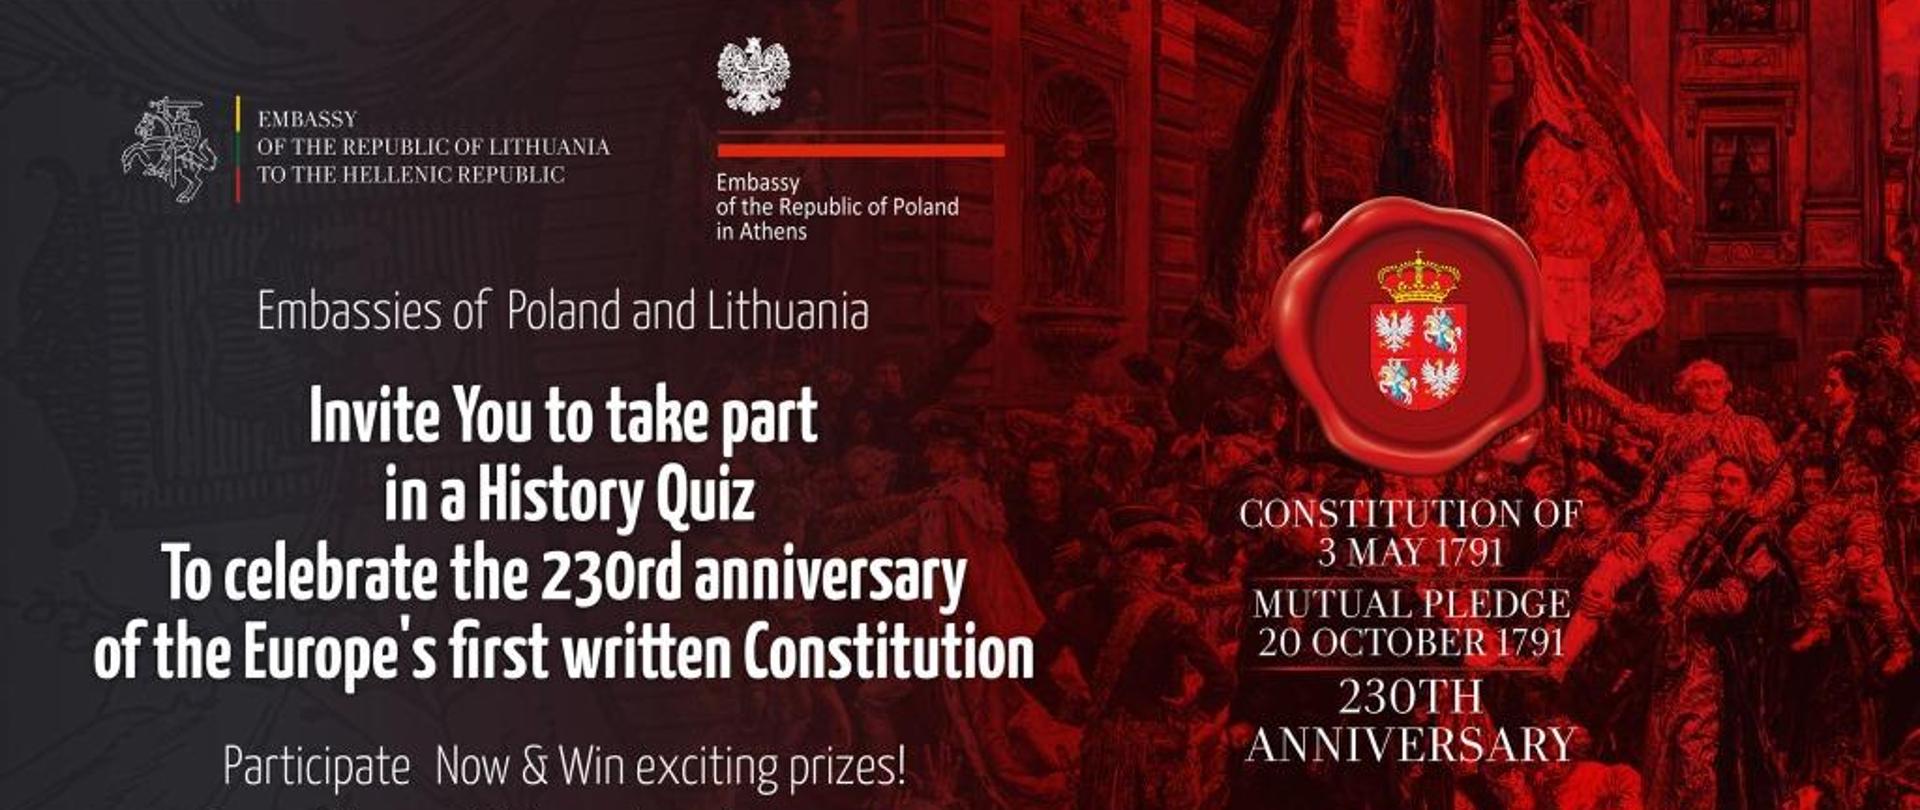 Invitation to quiz on May 3th Constitution 1